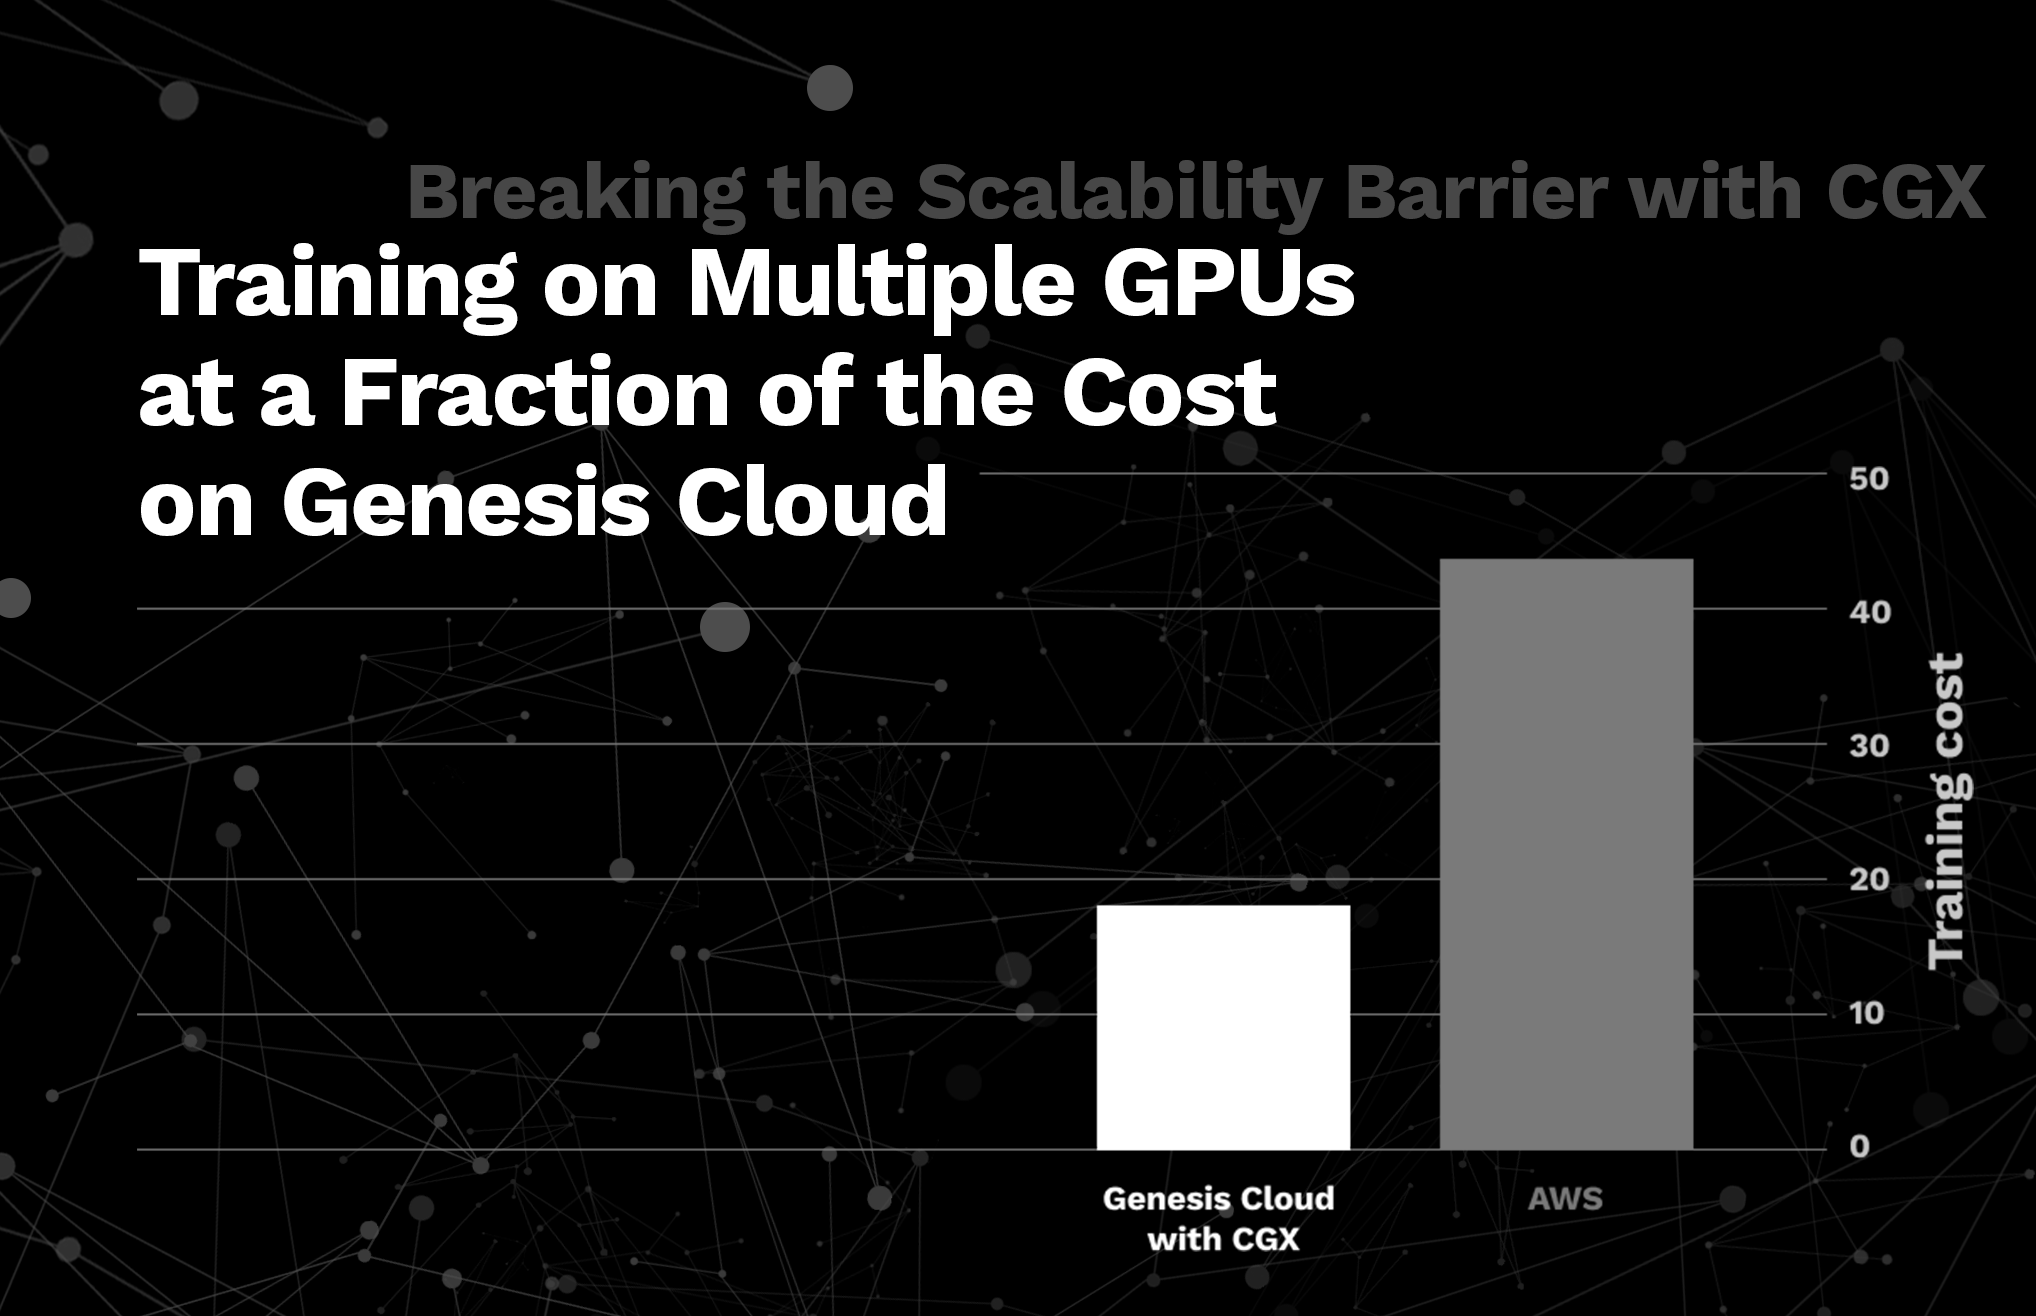 Breaking the Scalability Barrier with CGX: Training on Multiple GPUs at a Fraction of the Cost on Genesis Cloud